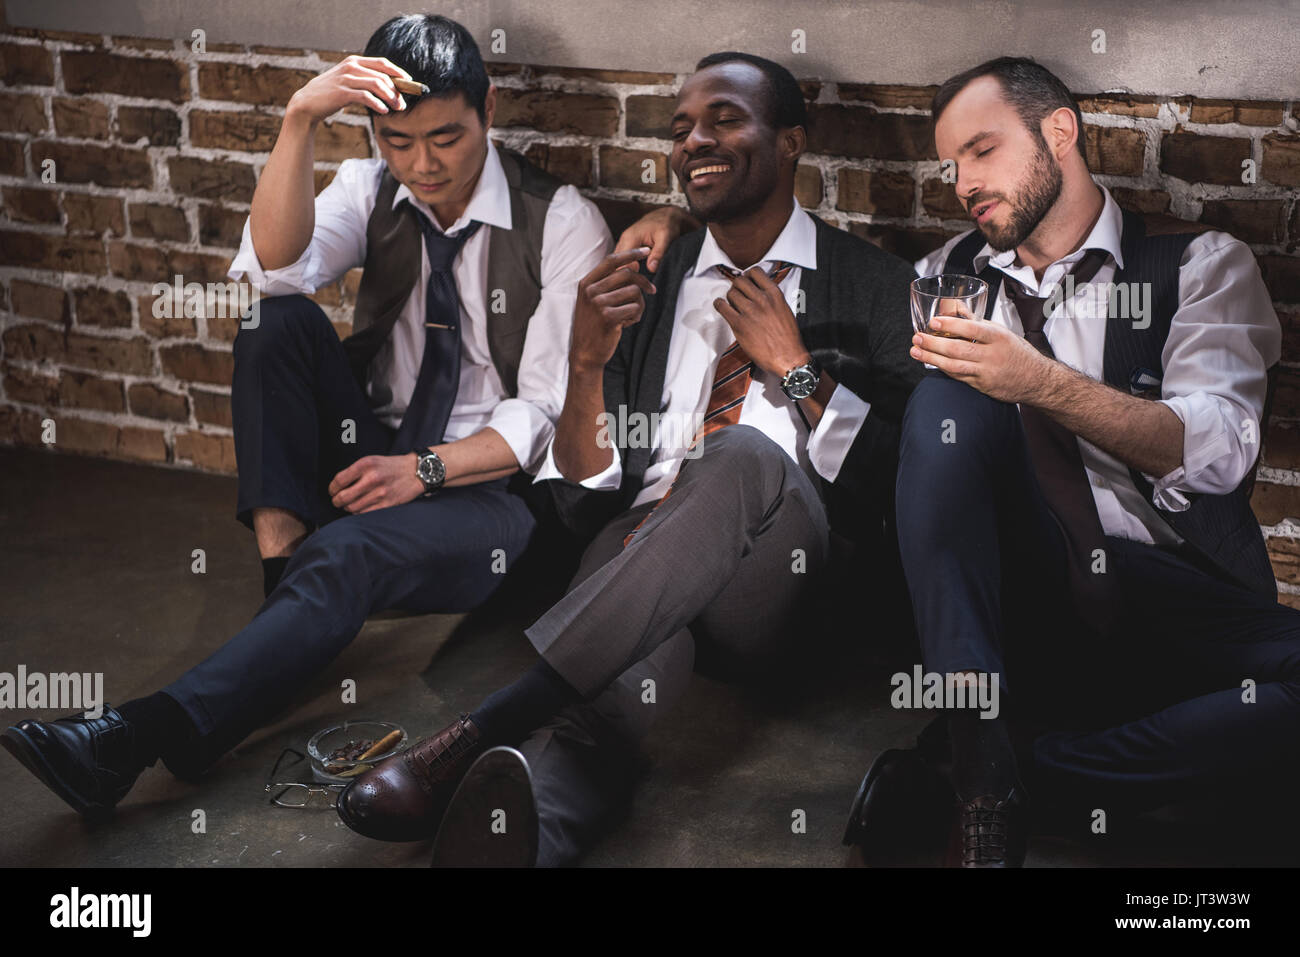 group of tired stylish businessmen resting together after work Stock Photo